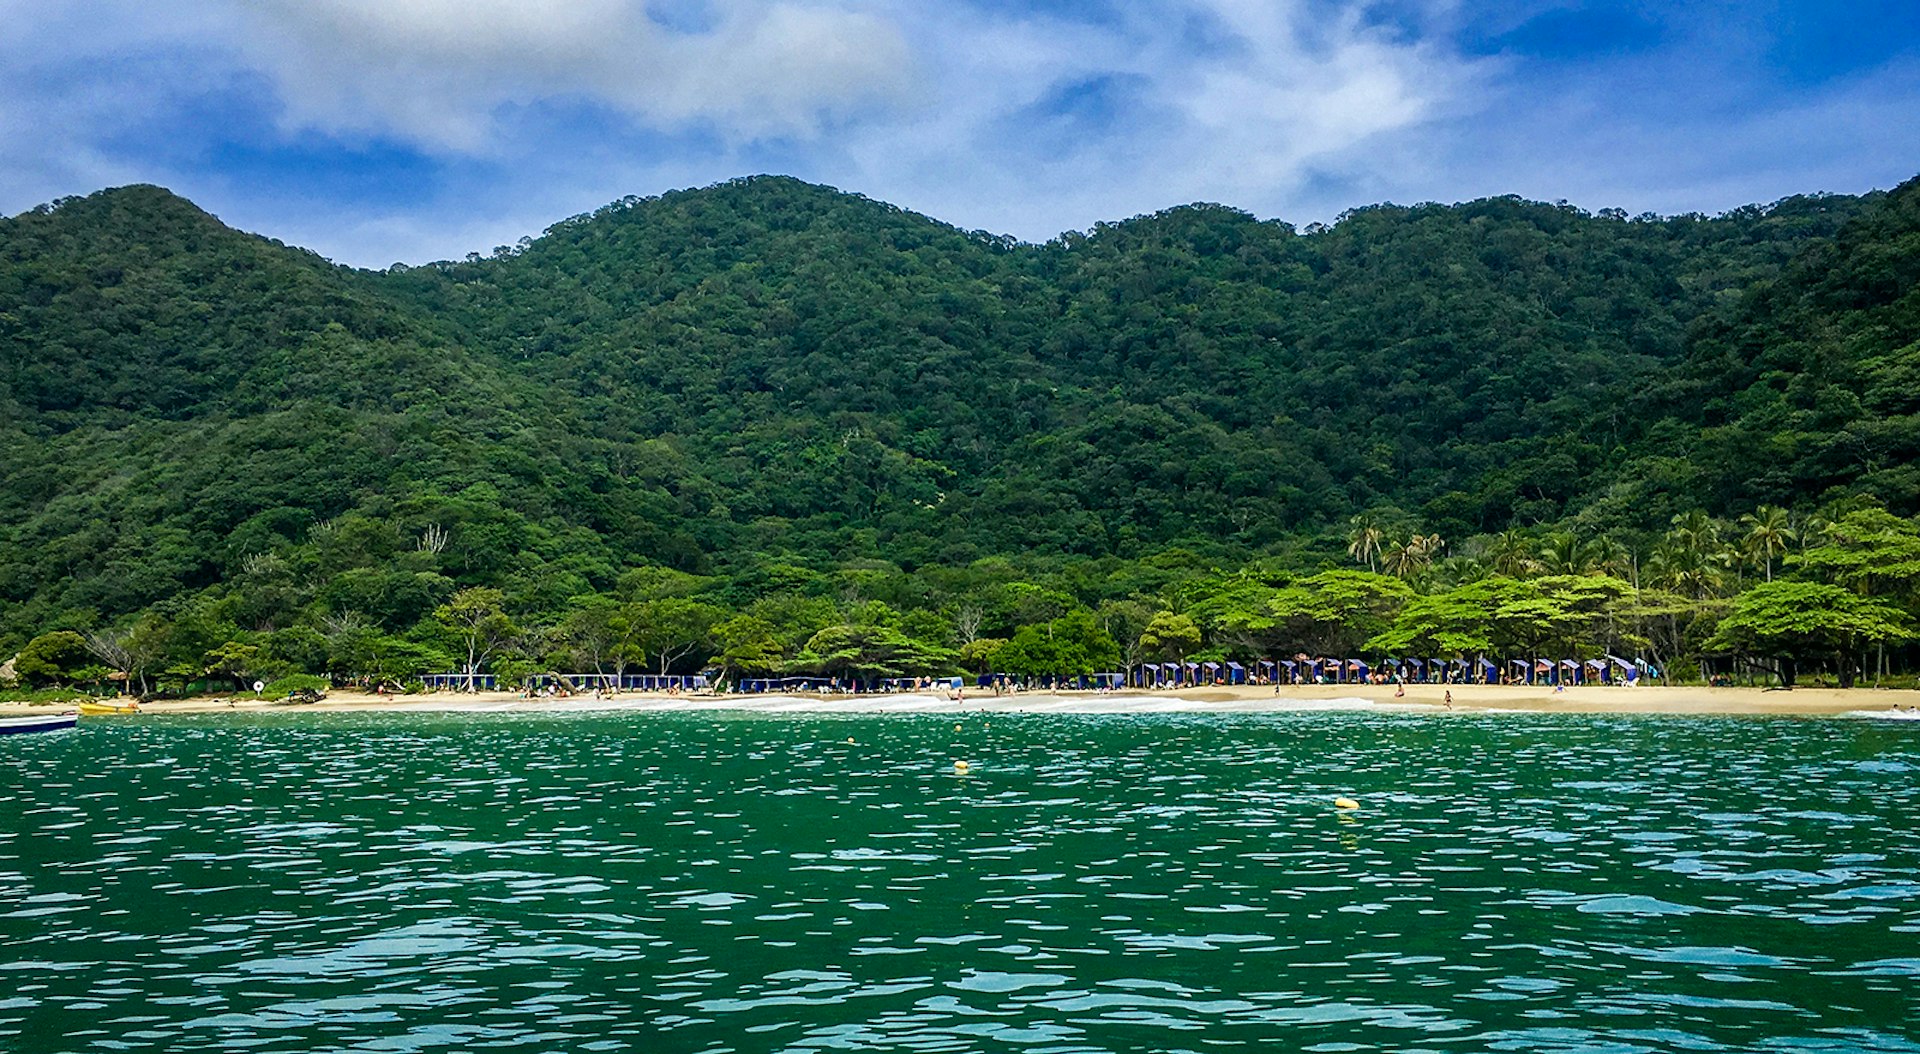 An image taken from the water of a beach backed by forested green hills